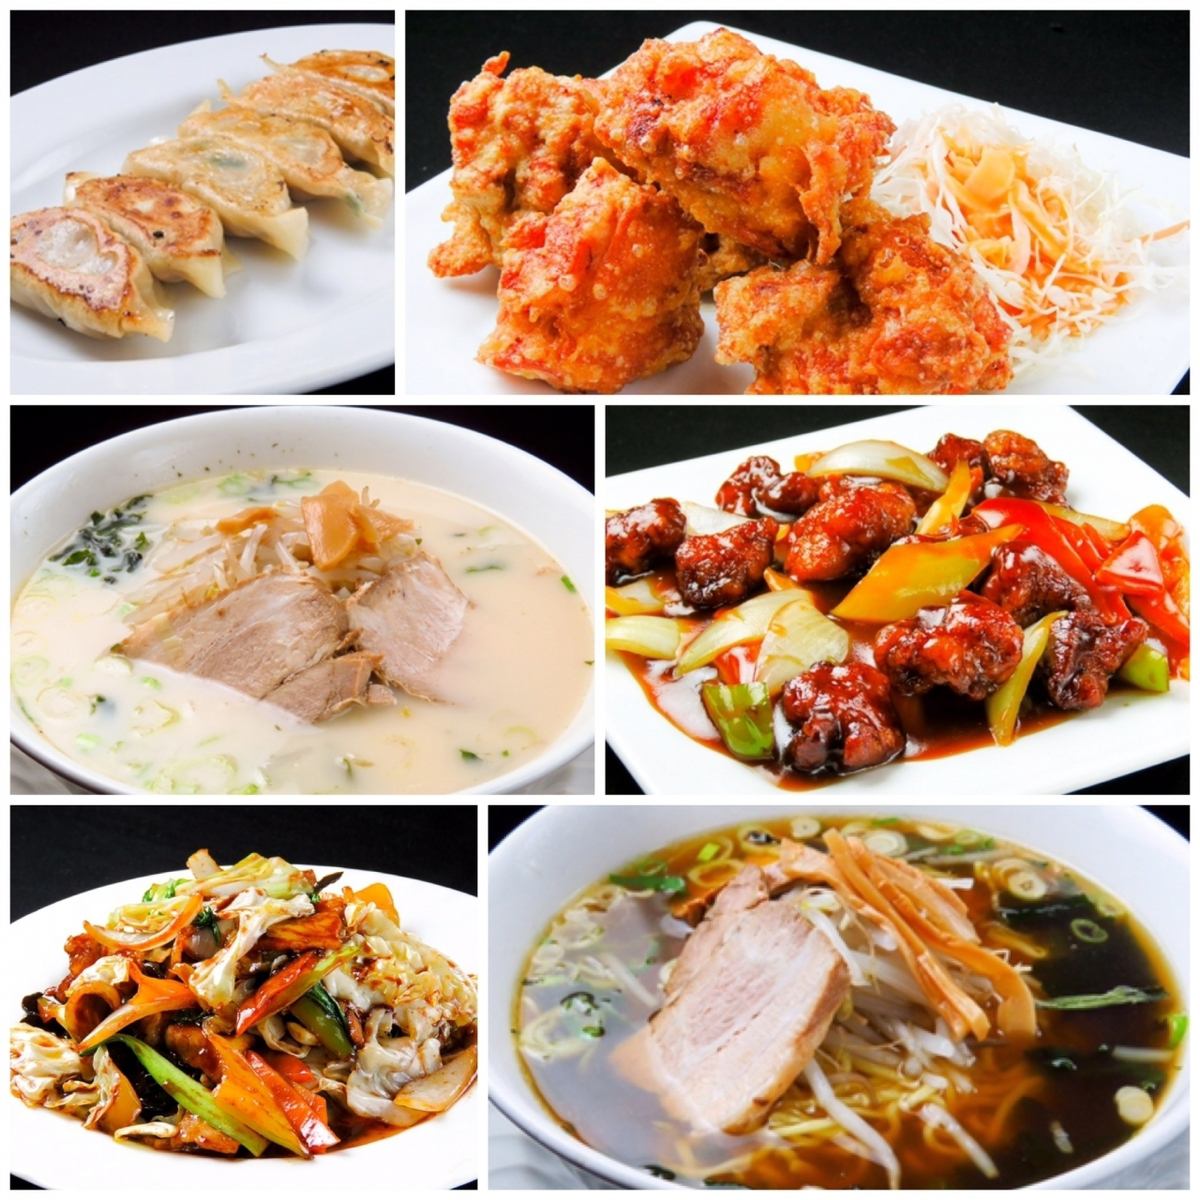 All-you-can-eat delicious Chinese food for 120 minutes! 2,980 yen / 3,980 yen with 120 minutes of all-you-can-drink